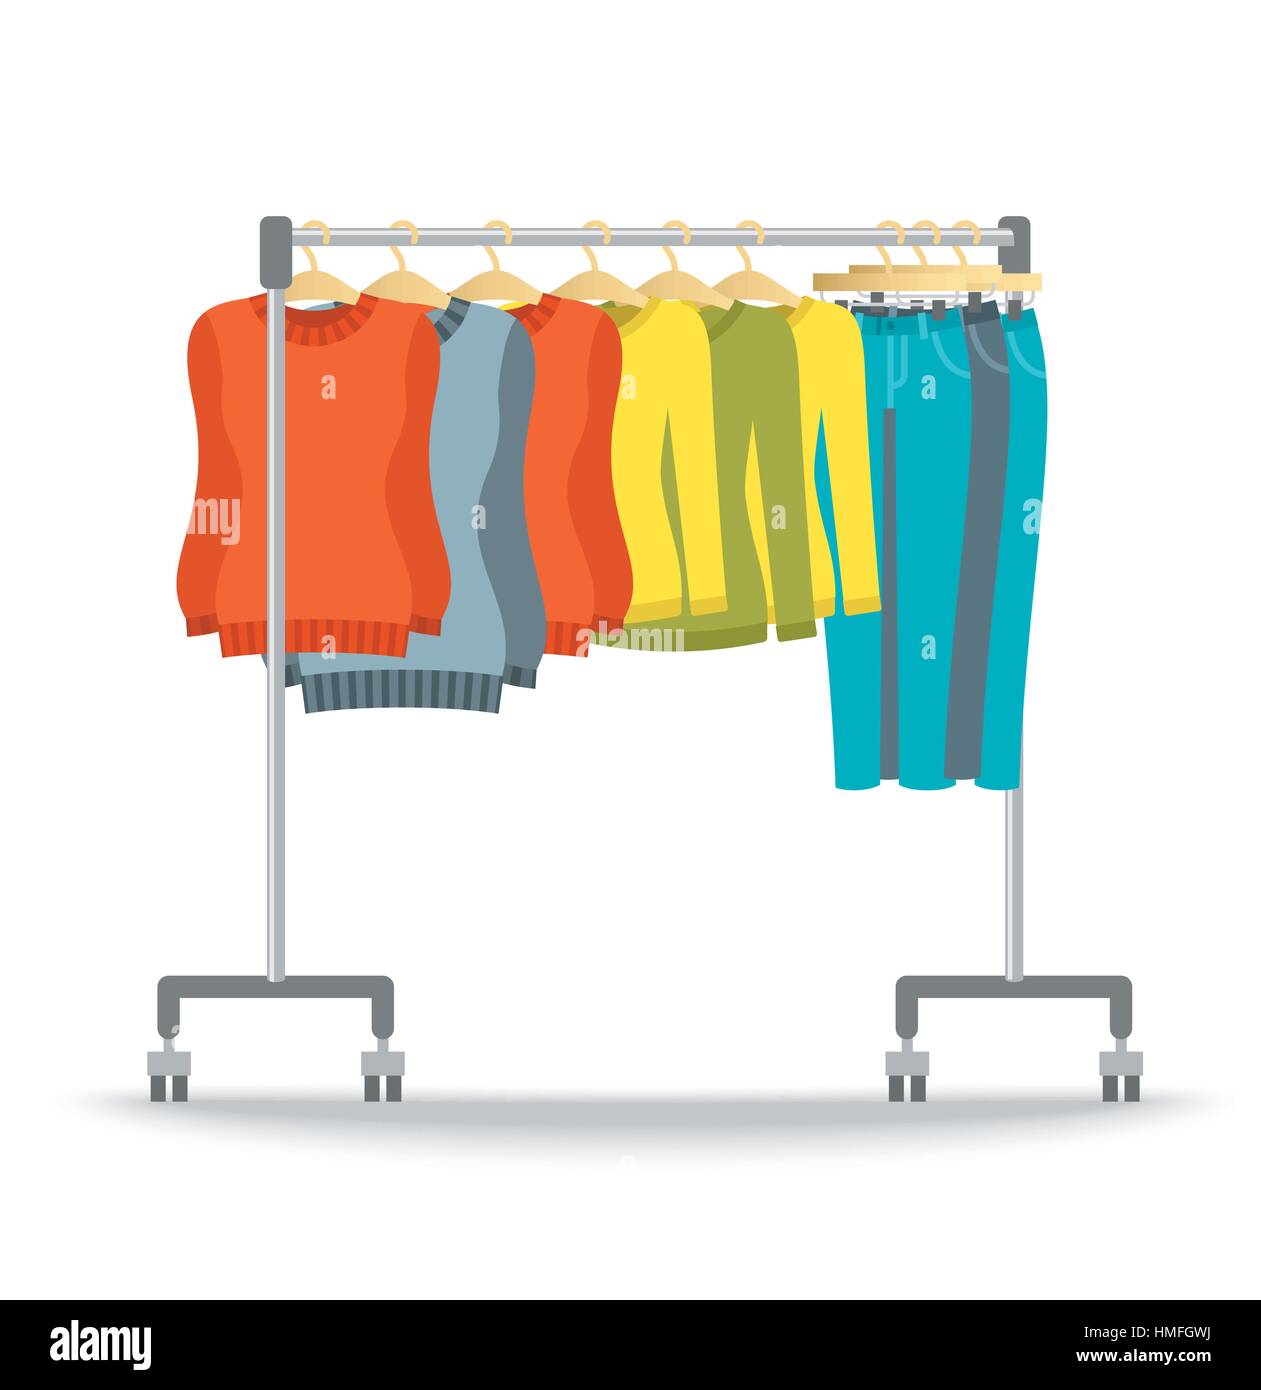 Hanger rack with warm women clothes winter collection. Flat style vector illustration. Female casual outfit elements hanging on rolling display stand. Stock Vector